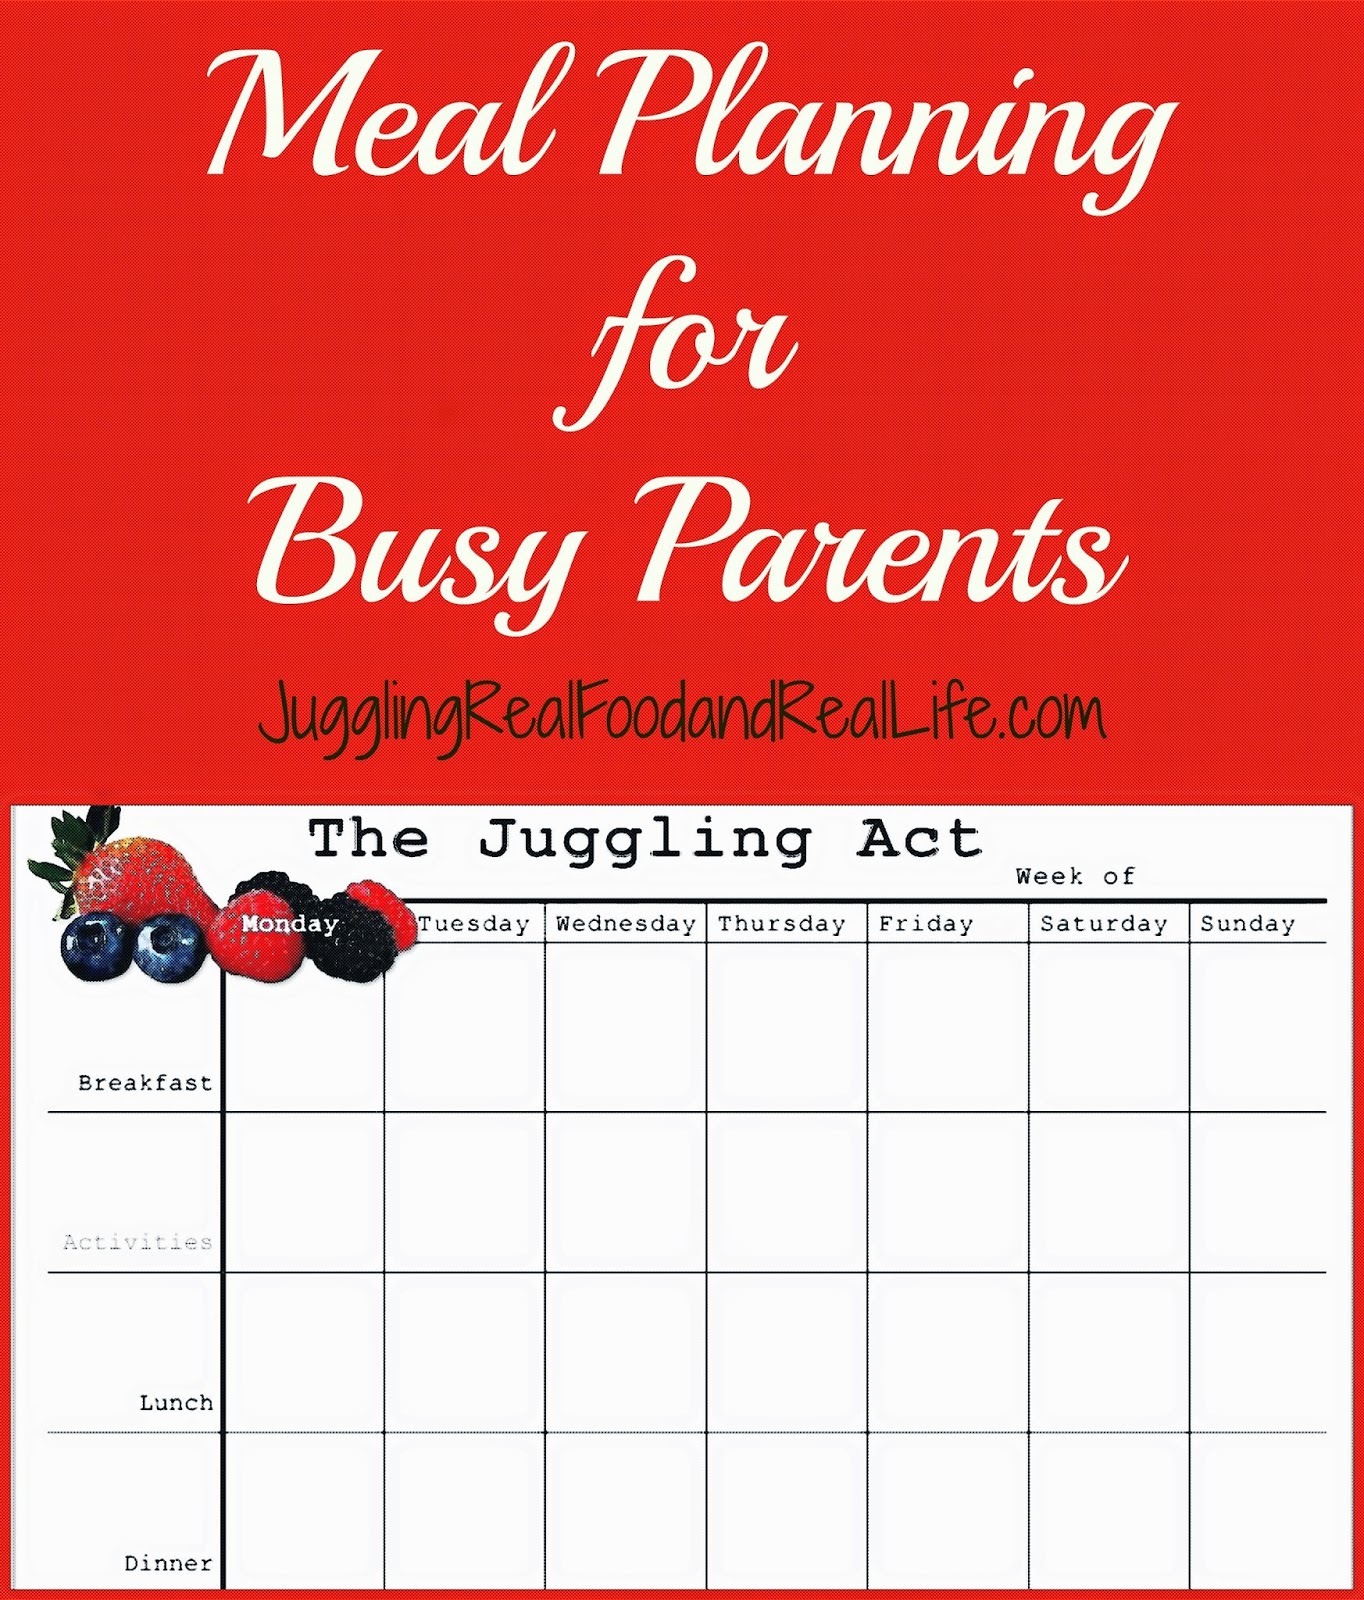 Spring is the Time to Meal Plan + Free Meal Plan Printable